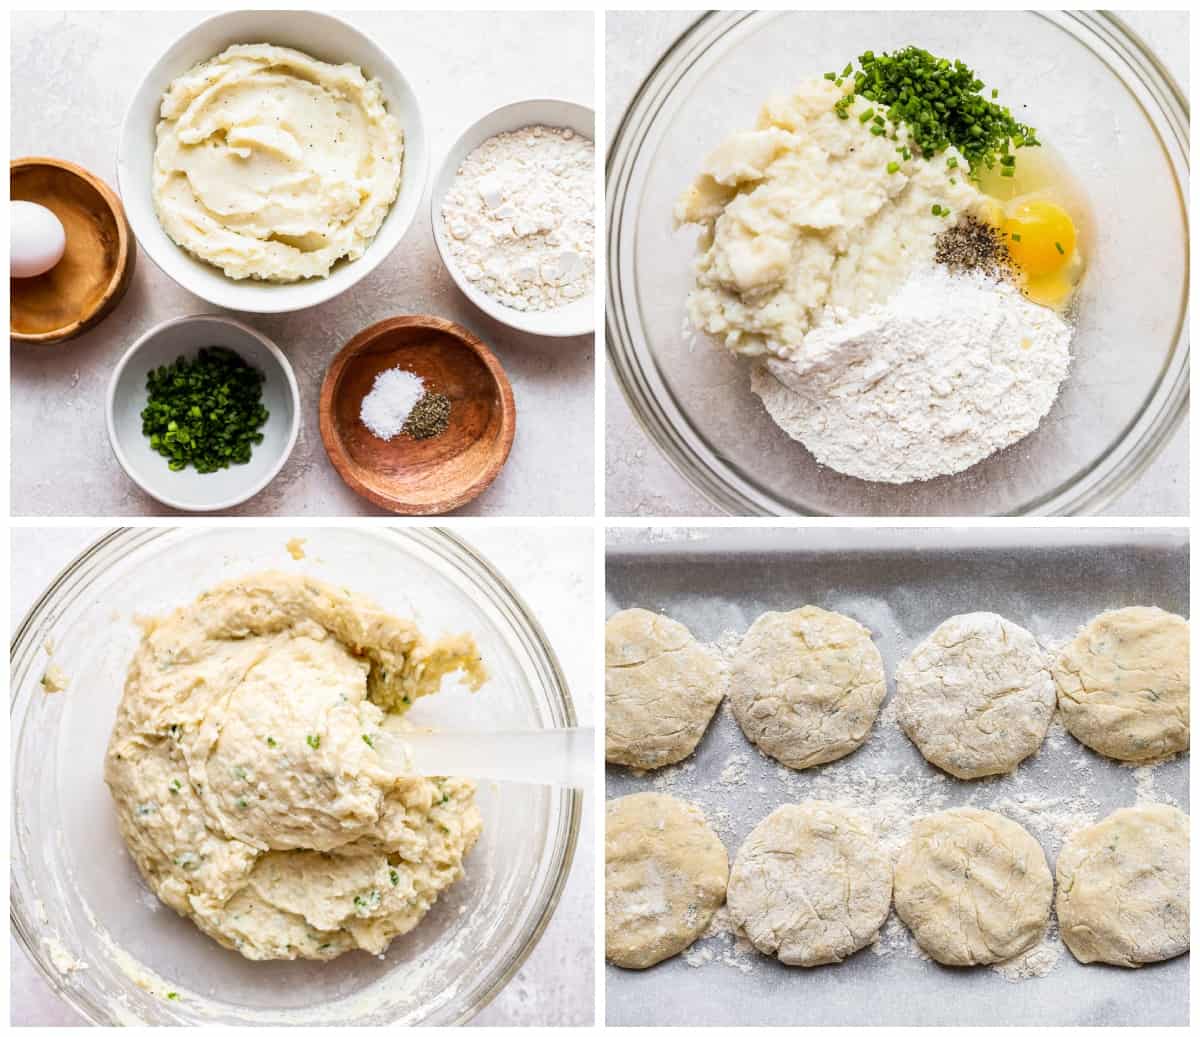 a series of photos showing the process of making mashed potato cakes.